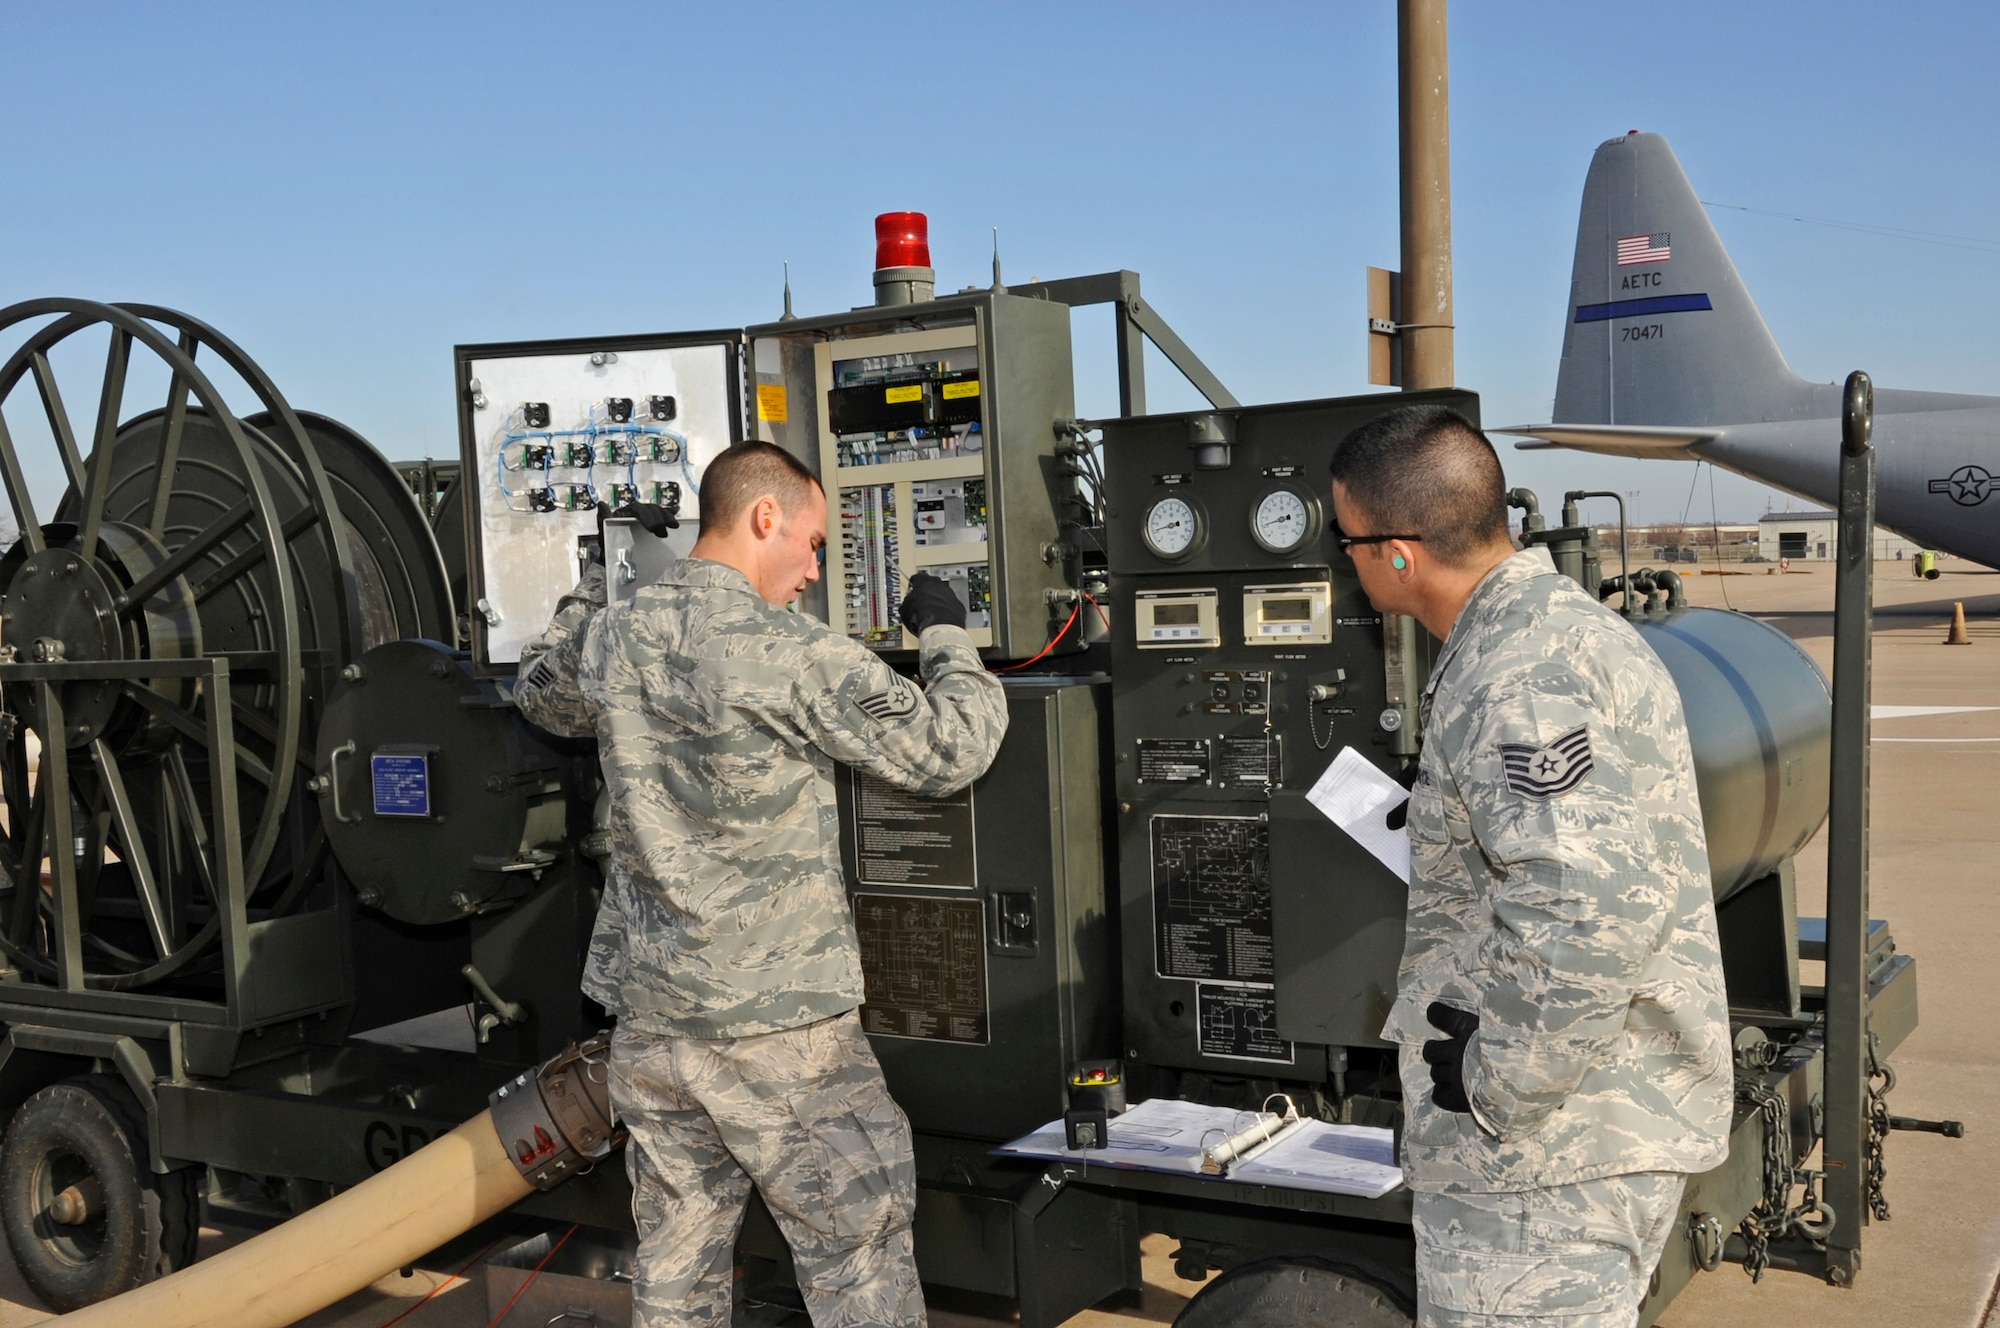 Airmen cover start-up procedures for refueling equipment Jan. 31, 2012 during the new Fuels Operational Readiness Capability Equipment (FORCE) training course taught by the 364th Training Squadron at Sheppard Air Force Base, Texas.  FORCE training looks at the fuels equipment of the future currently only being used in deployed locations. (U.S. Air Force photo/Frank Carter)